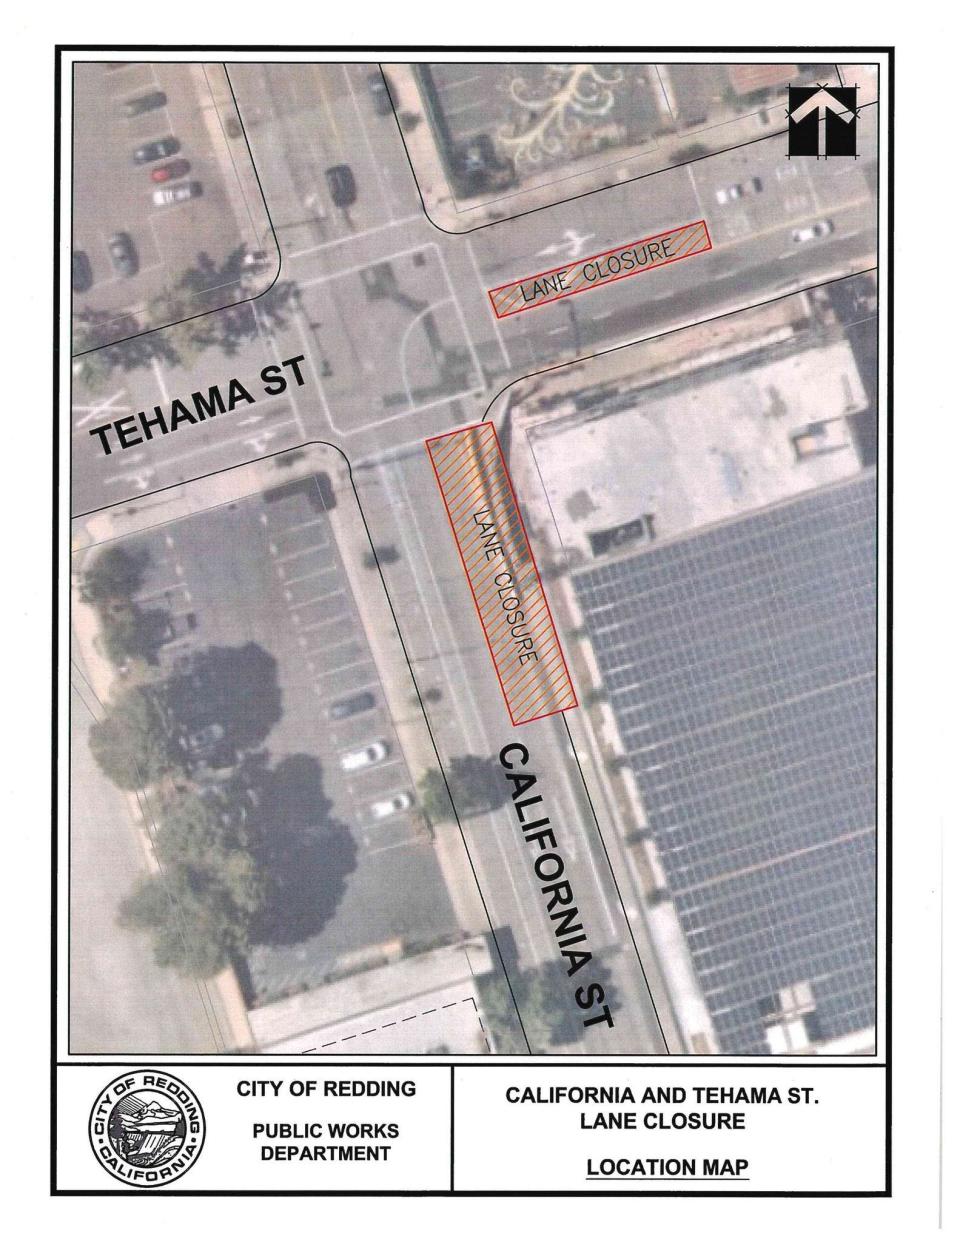 The California Department of Transportation plans to place traffic controls at the intersection of California and Tehama streets in Redding until 4 p.m. on Thursday, Dec. 15, 2022.